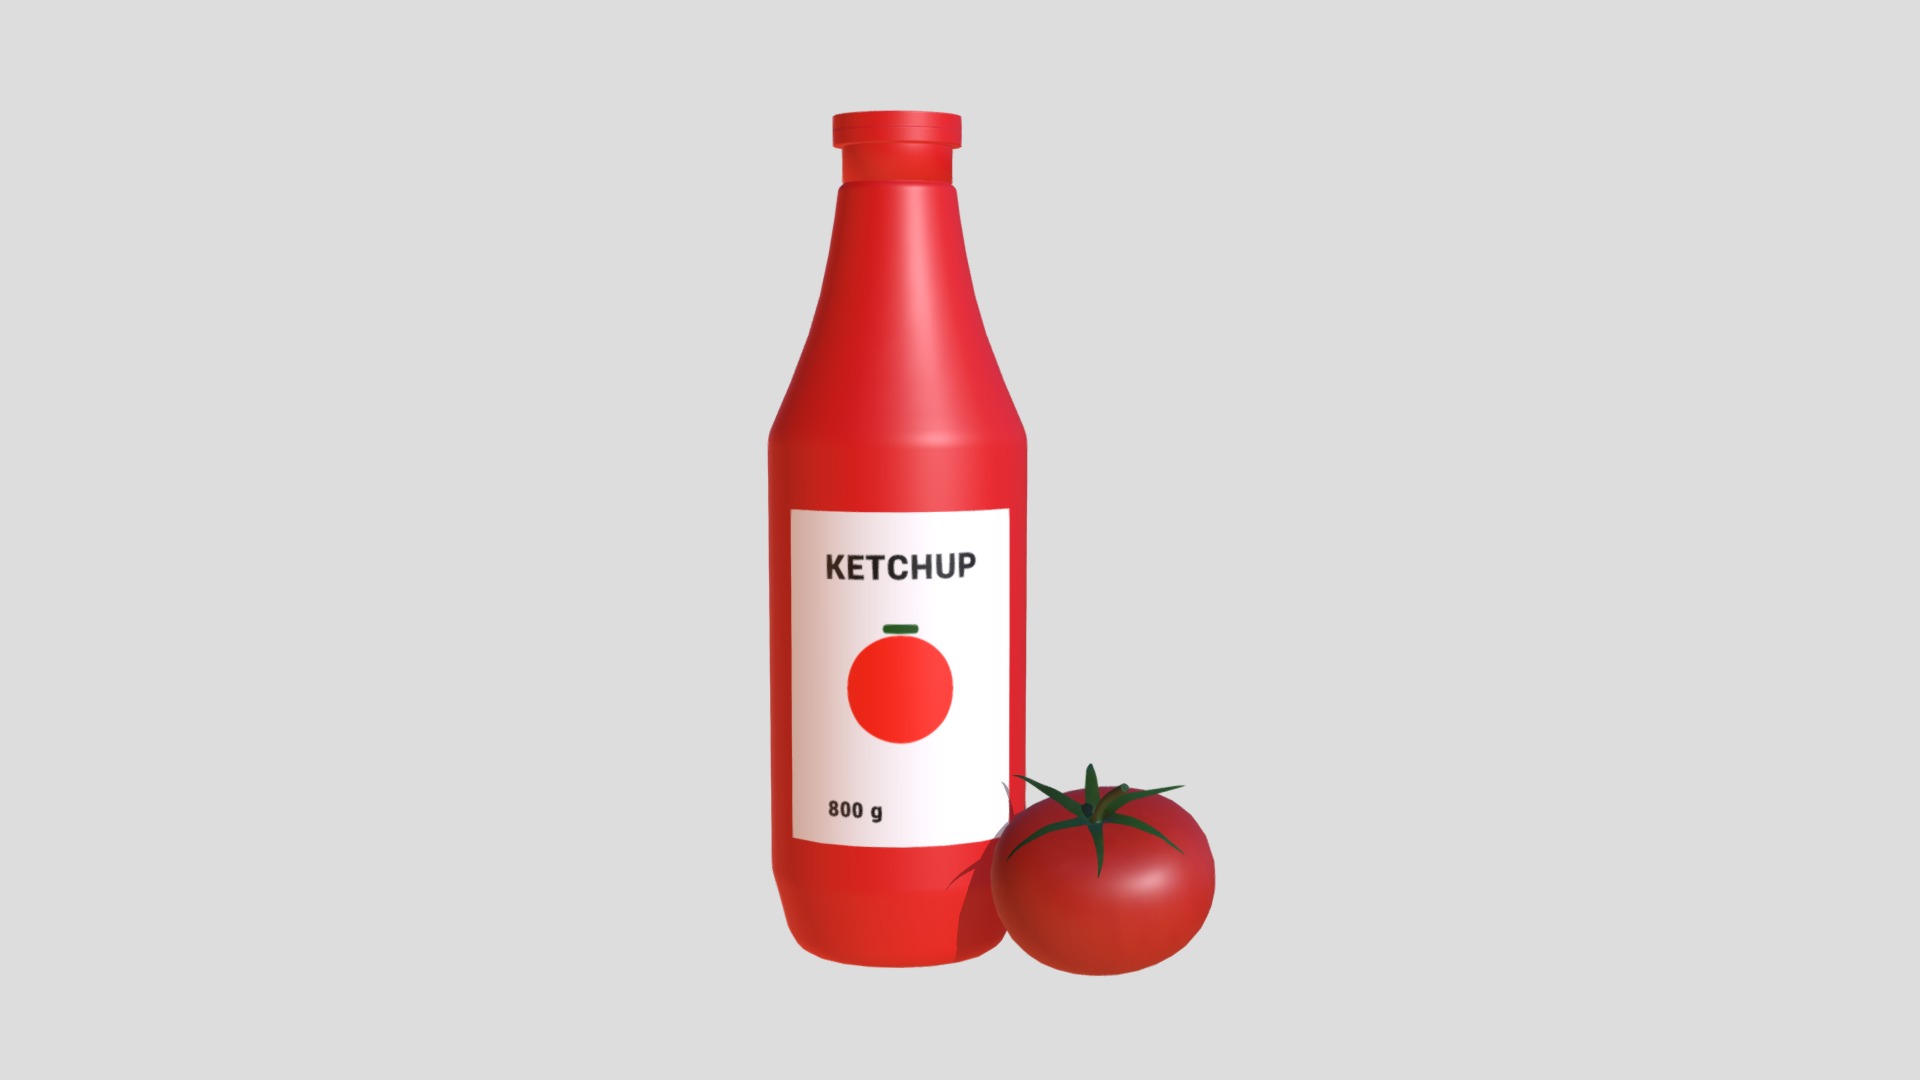 3D model Ketchup (mockup) - This is a 3D model of the Ketchup (mockup). The 3D model is about a red bottle with a red label.